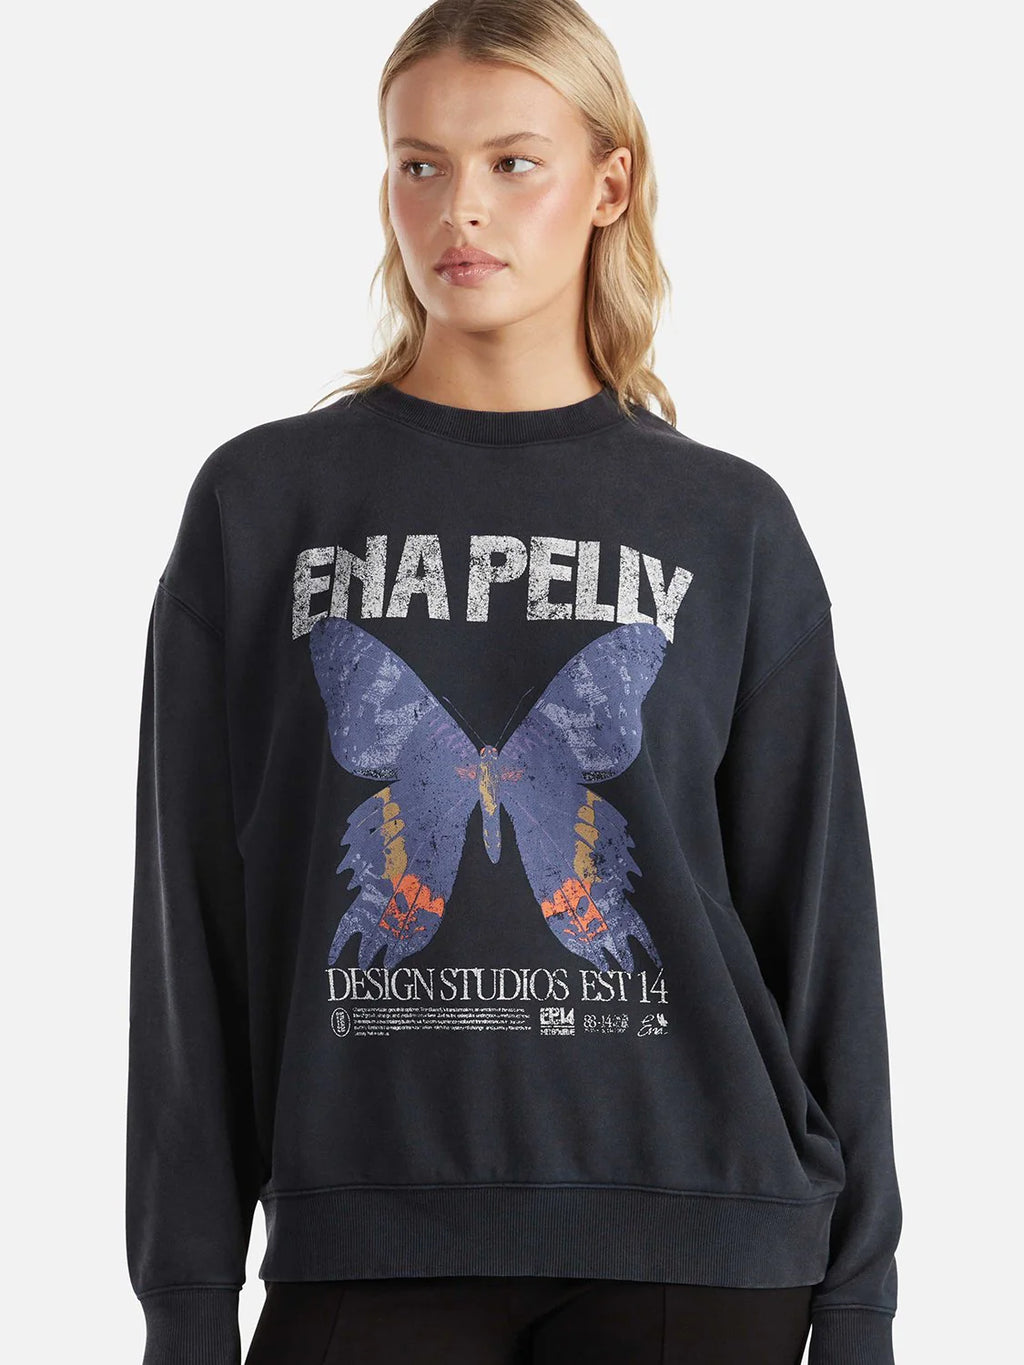 ENA PELLY - Lilly Oversized Sweater Morph - Vintage Black